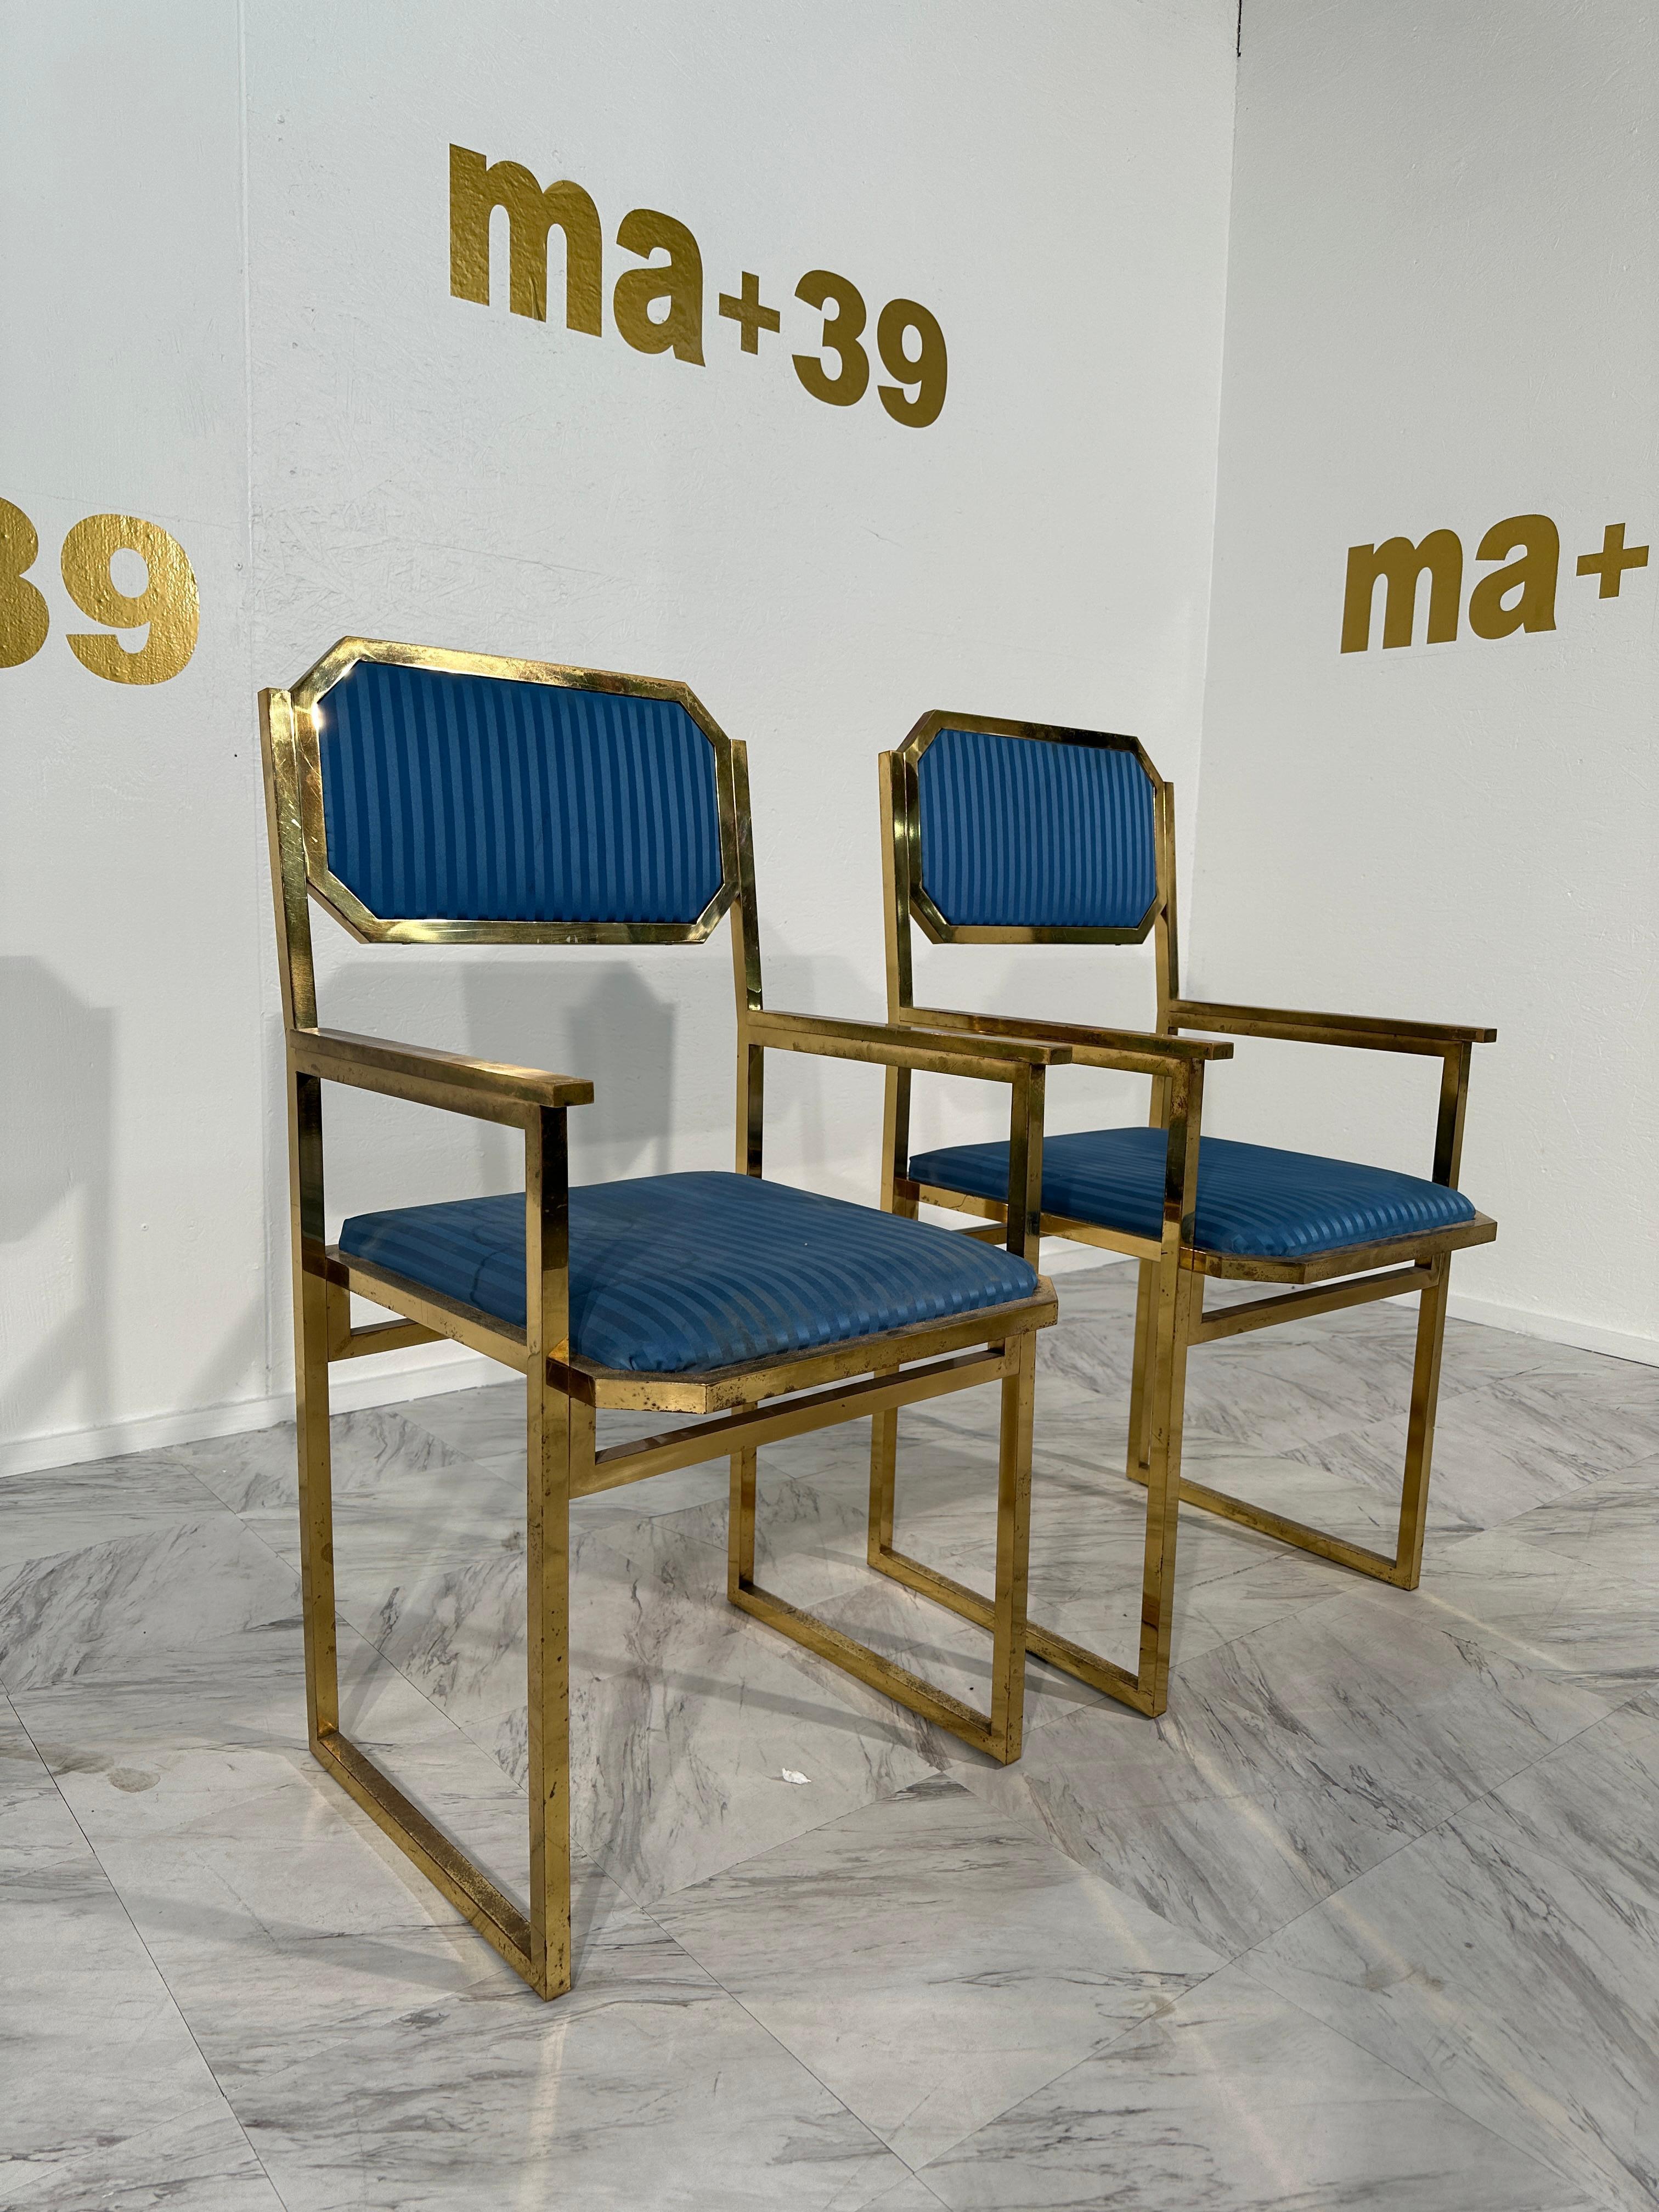 The Set of 2 Vintage Italian Dining Chairs by Romeo Rega from the 1970s exemplifies the sophisticated and sleek design of the era. Crafted by renowned Italian designer Romeo Rega, these chairs feature a harmonious blend of chrome-plated metal frames